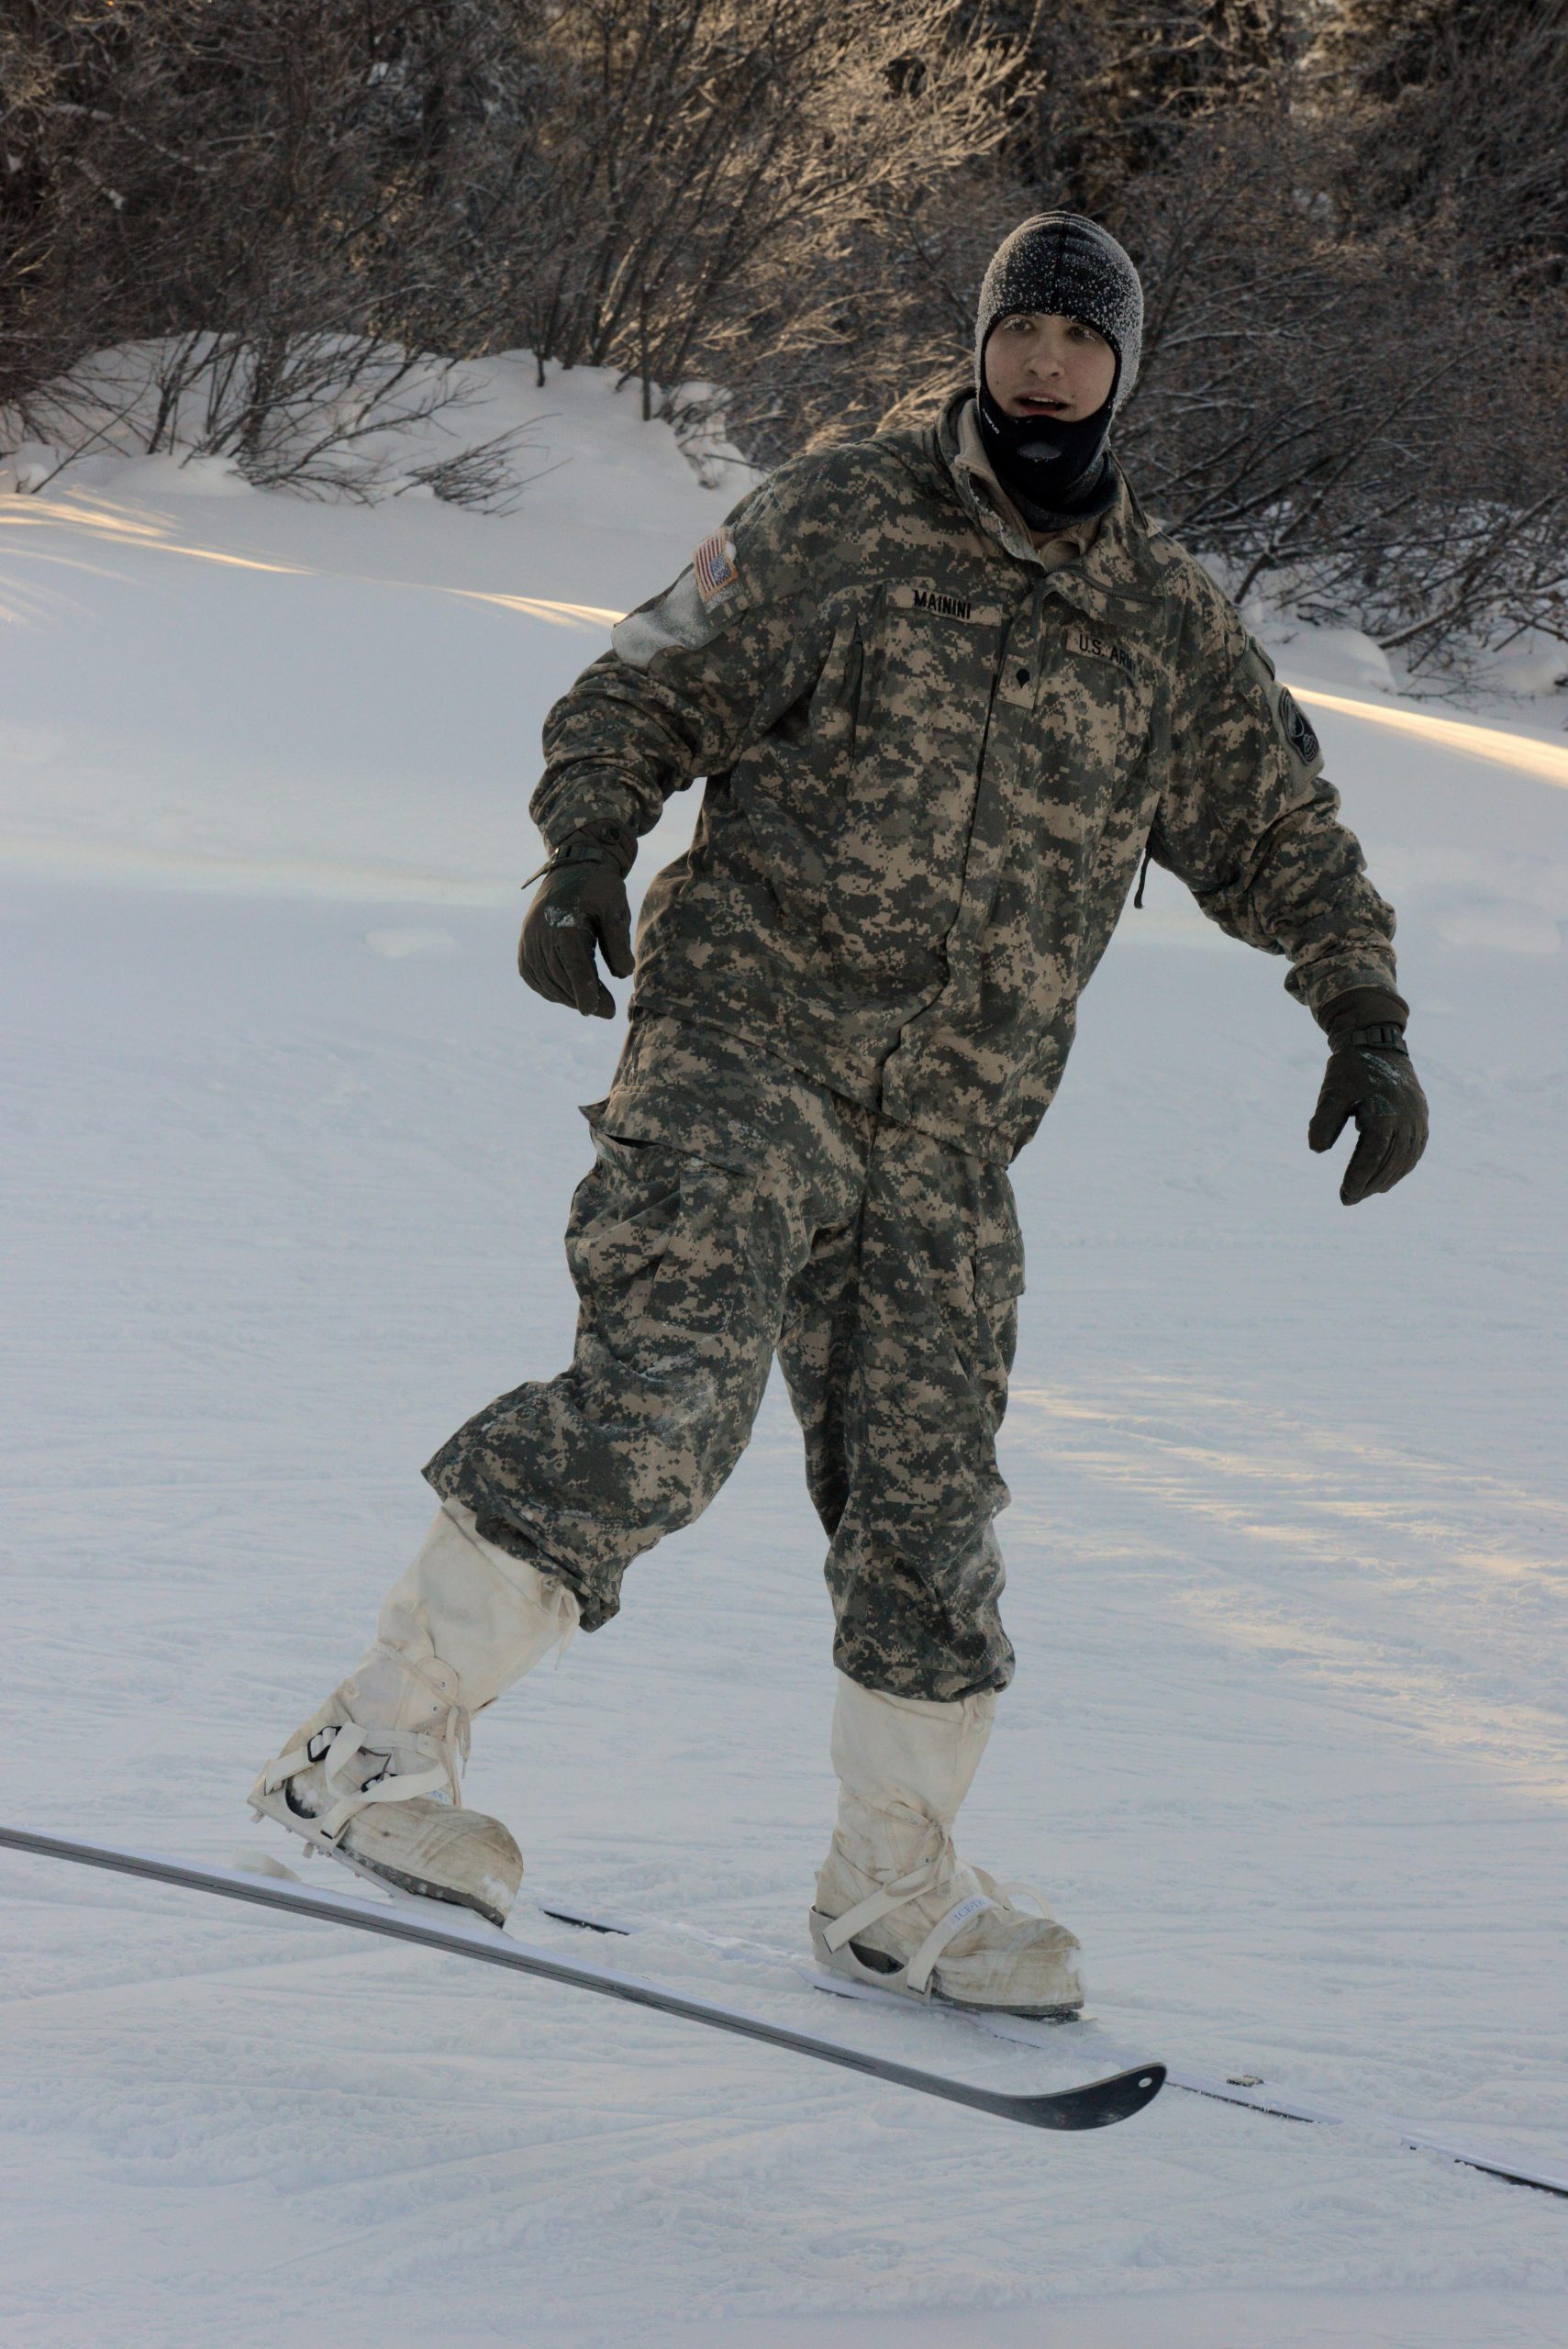 Army Spc. Elijah Mainini, a student at the Northern Warfare Training Center in Alaska, wears a size 16 boot and can't fit into a standard-issue Army vapor-barrier boot. He was issued Canadian forces mukluks and Jager skis. DoD photo by David Vergun. -